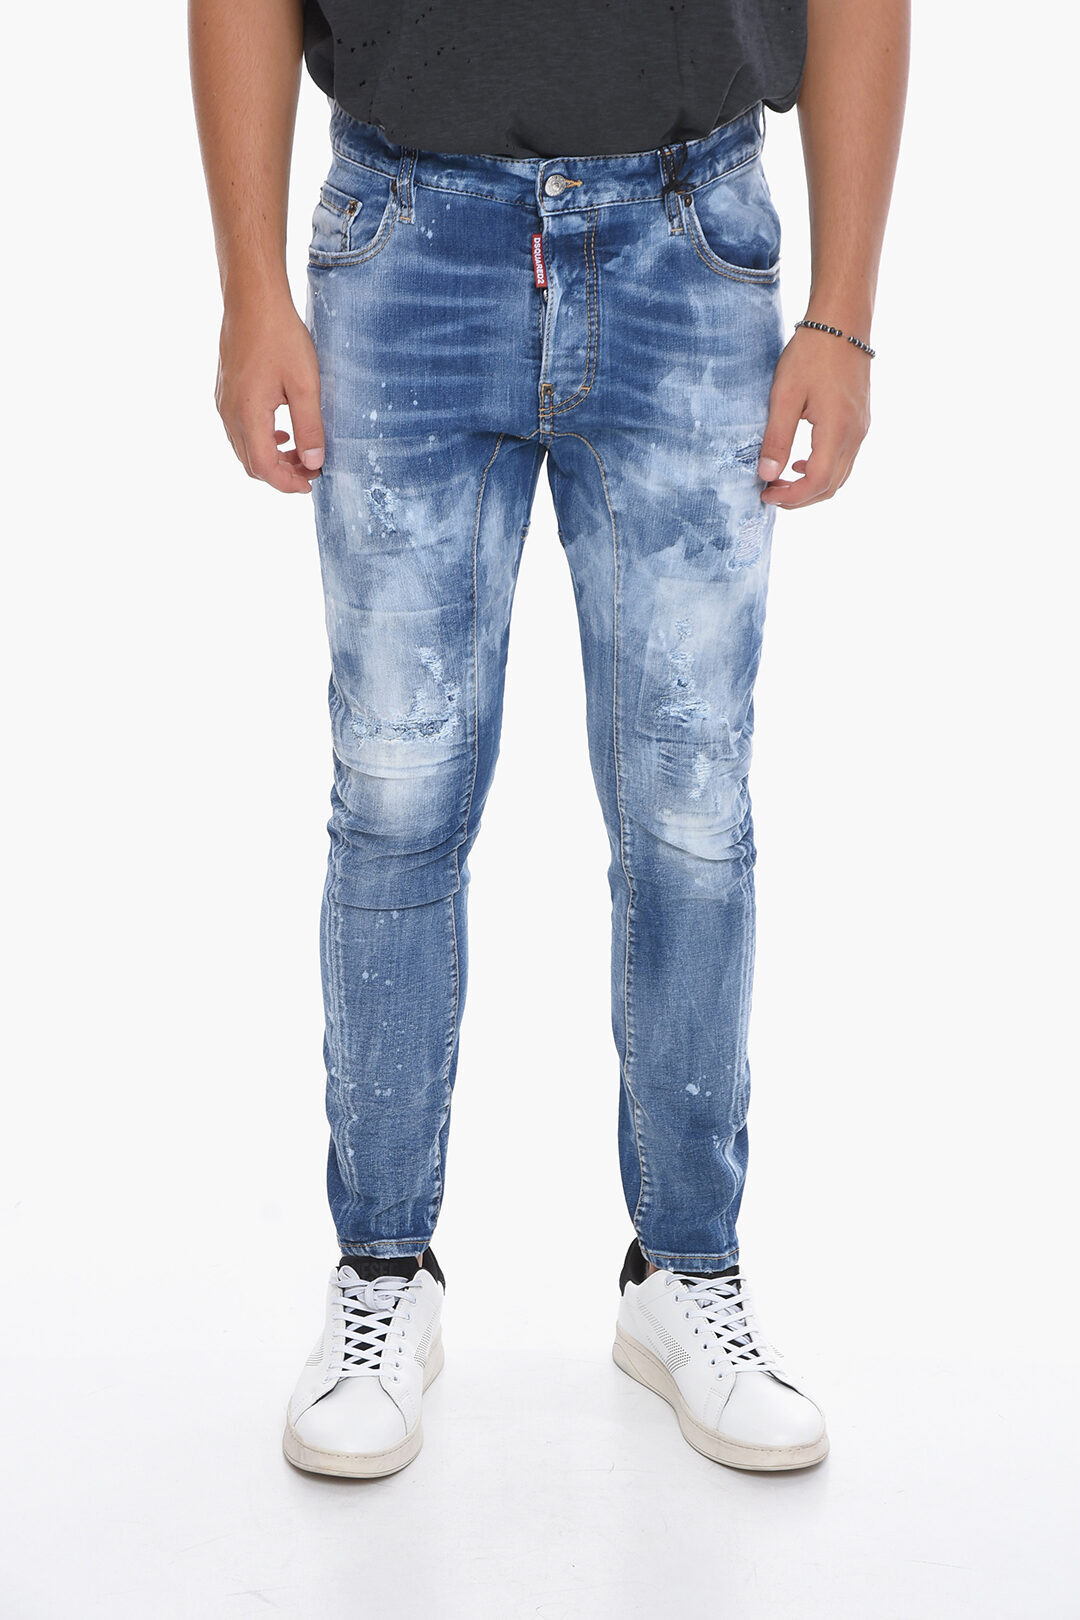 DSQUARED2 ディースクエアード デニム S74LB1179 S30789 470 メンズ TAPERED FIT DISTRESSED EFFECT TIDY BIKER JEANS 【関税・送料無料】【ラッピング無料】 dk